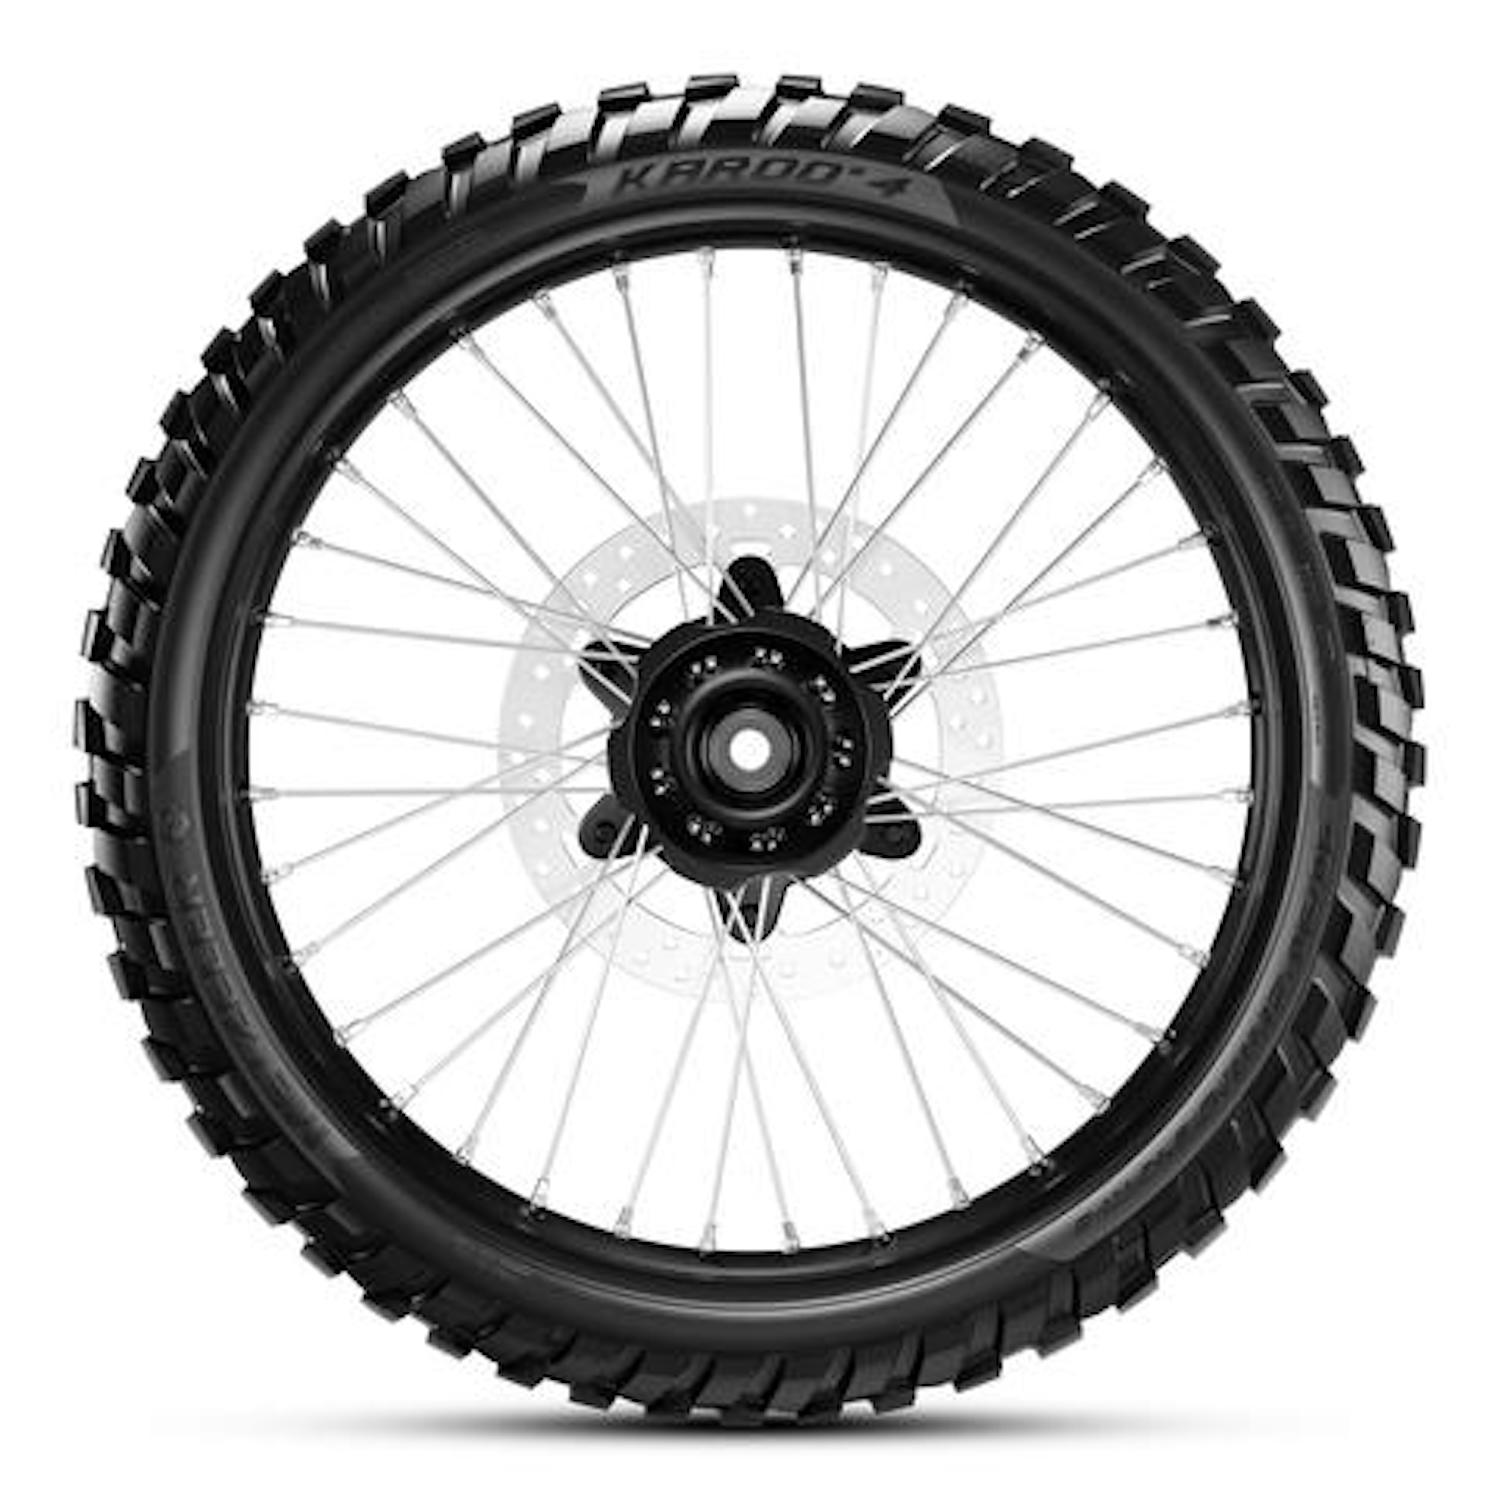 A view of the Metzeler Karoo 4 knobbly tyres, available as of this month